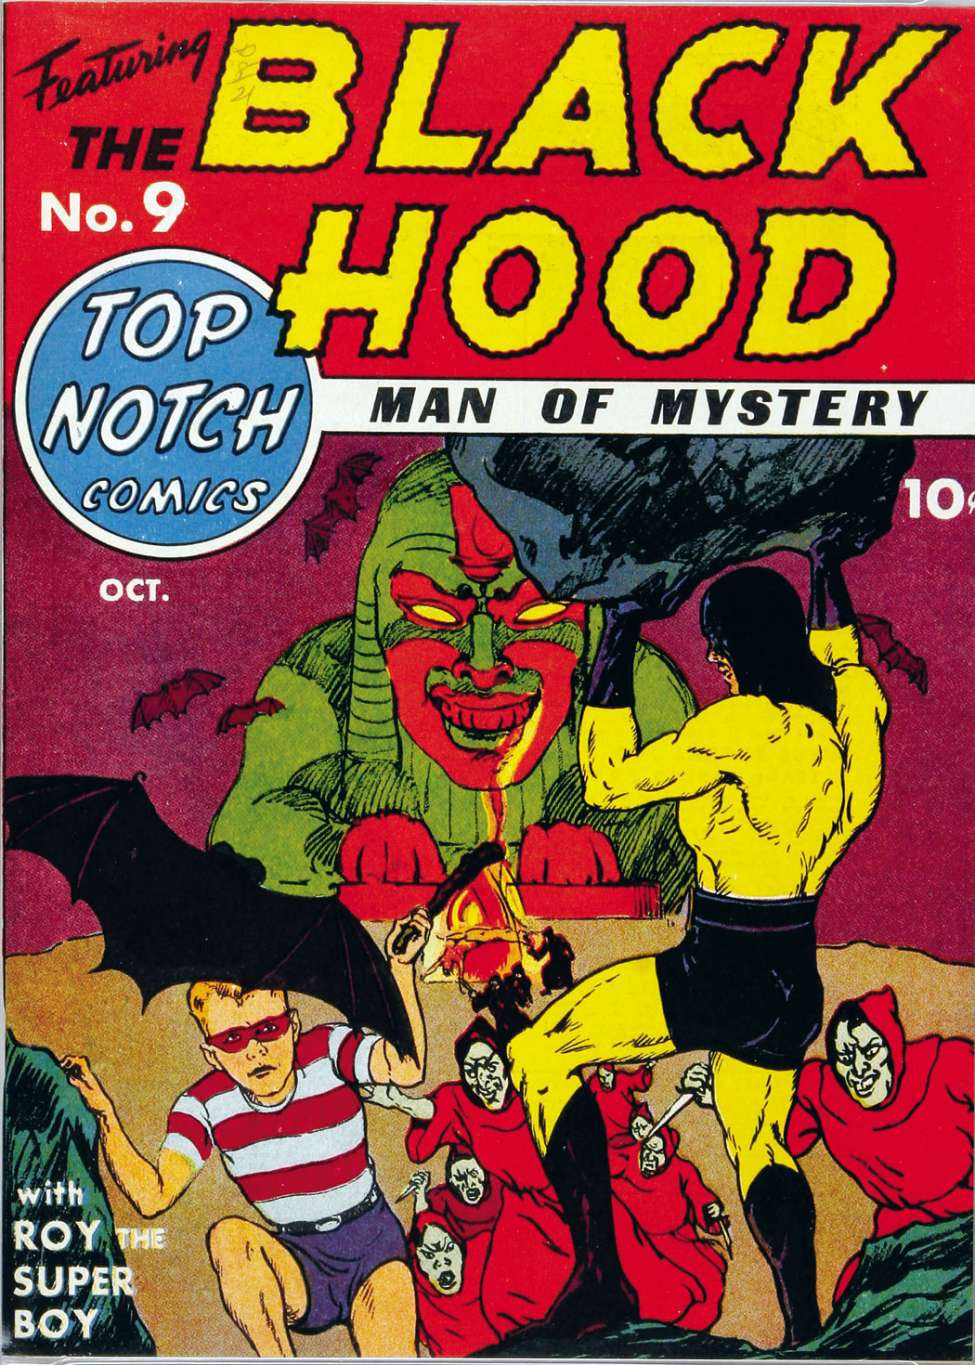 Book Cover For Top Notch Comics 9